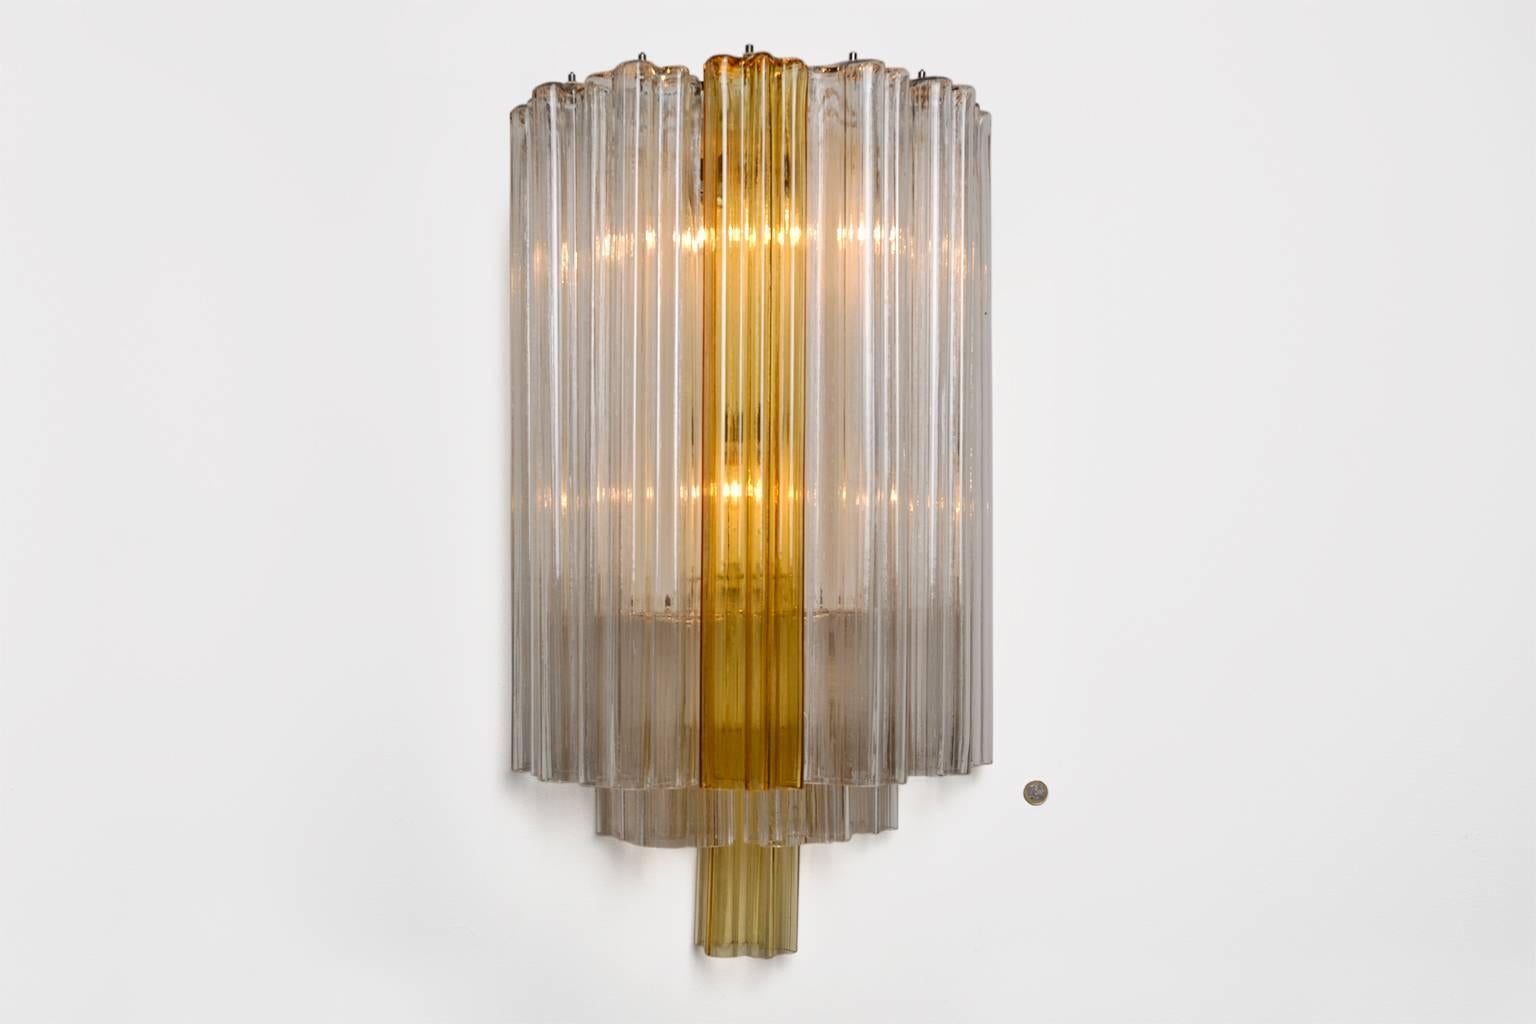 Very large 'Tronchi' wall lamp by Venini Murano, Italy 1960's.
Beautiful cloud shaped glass sculptures in clear and yellow / ochre. Provides a very nice and warm indirect light. Stunning wall object and light in one in excellent condition.

We